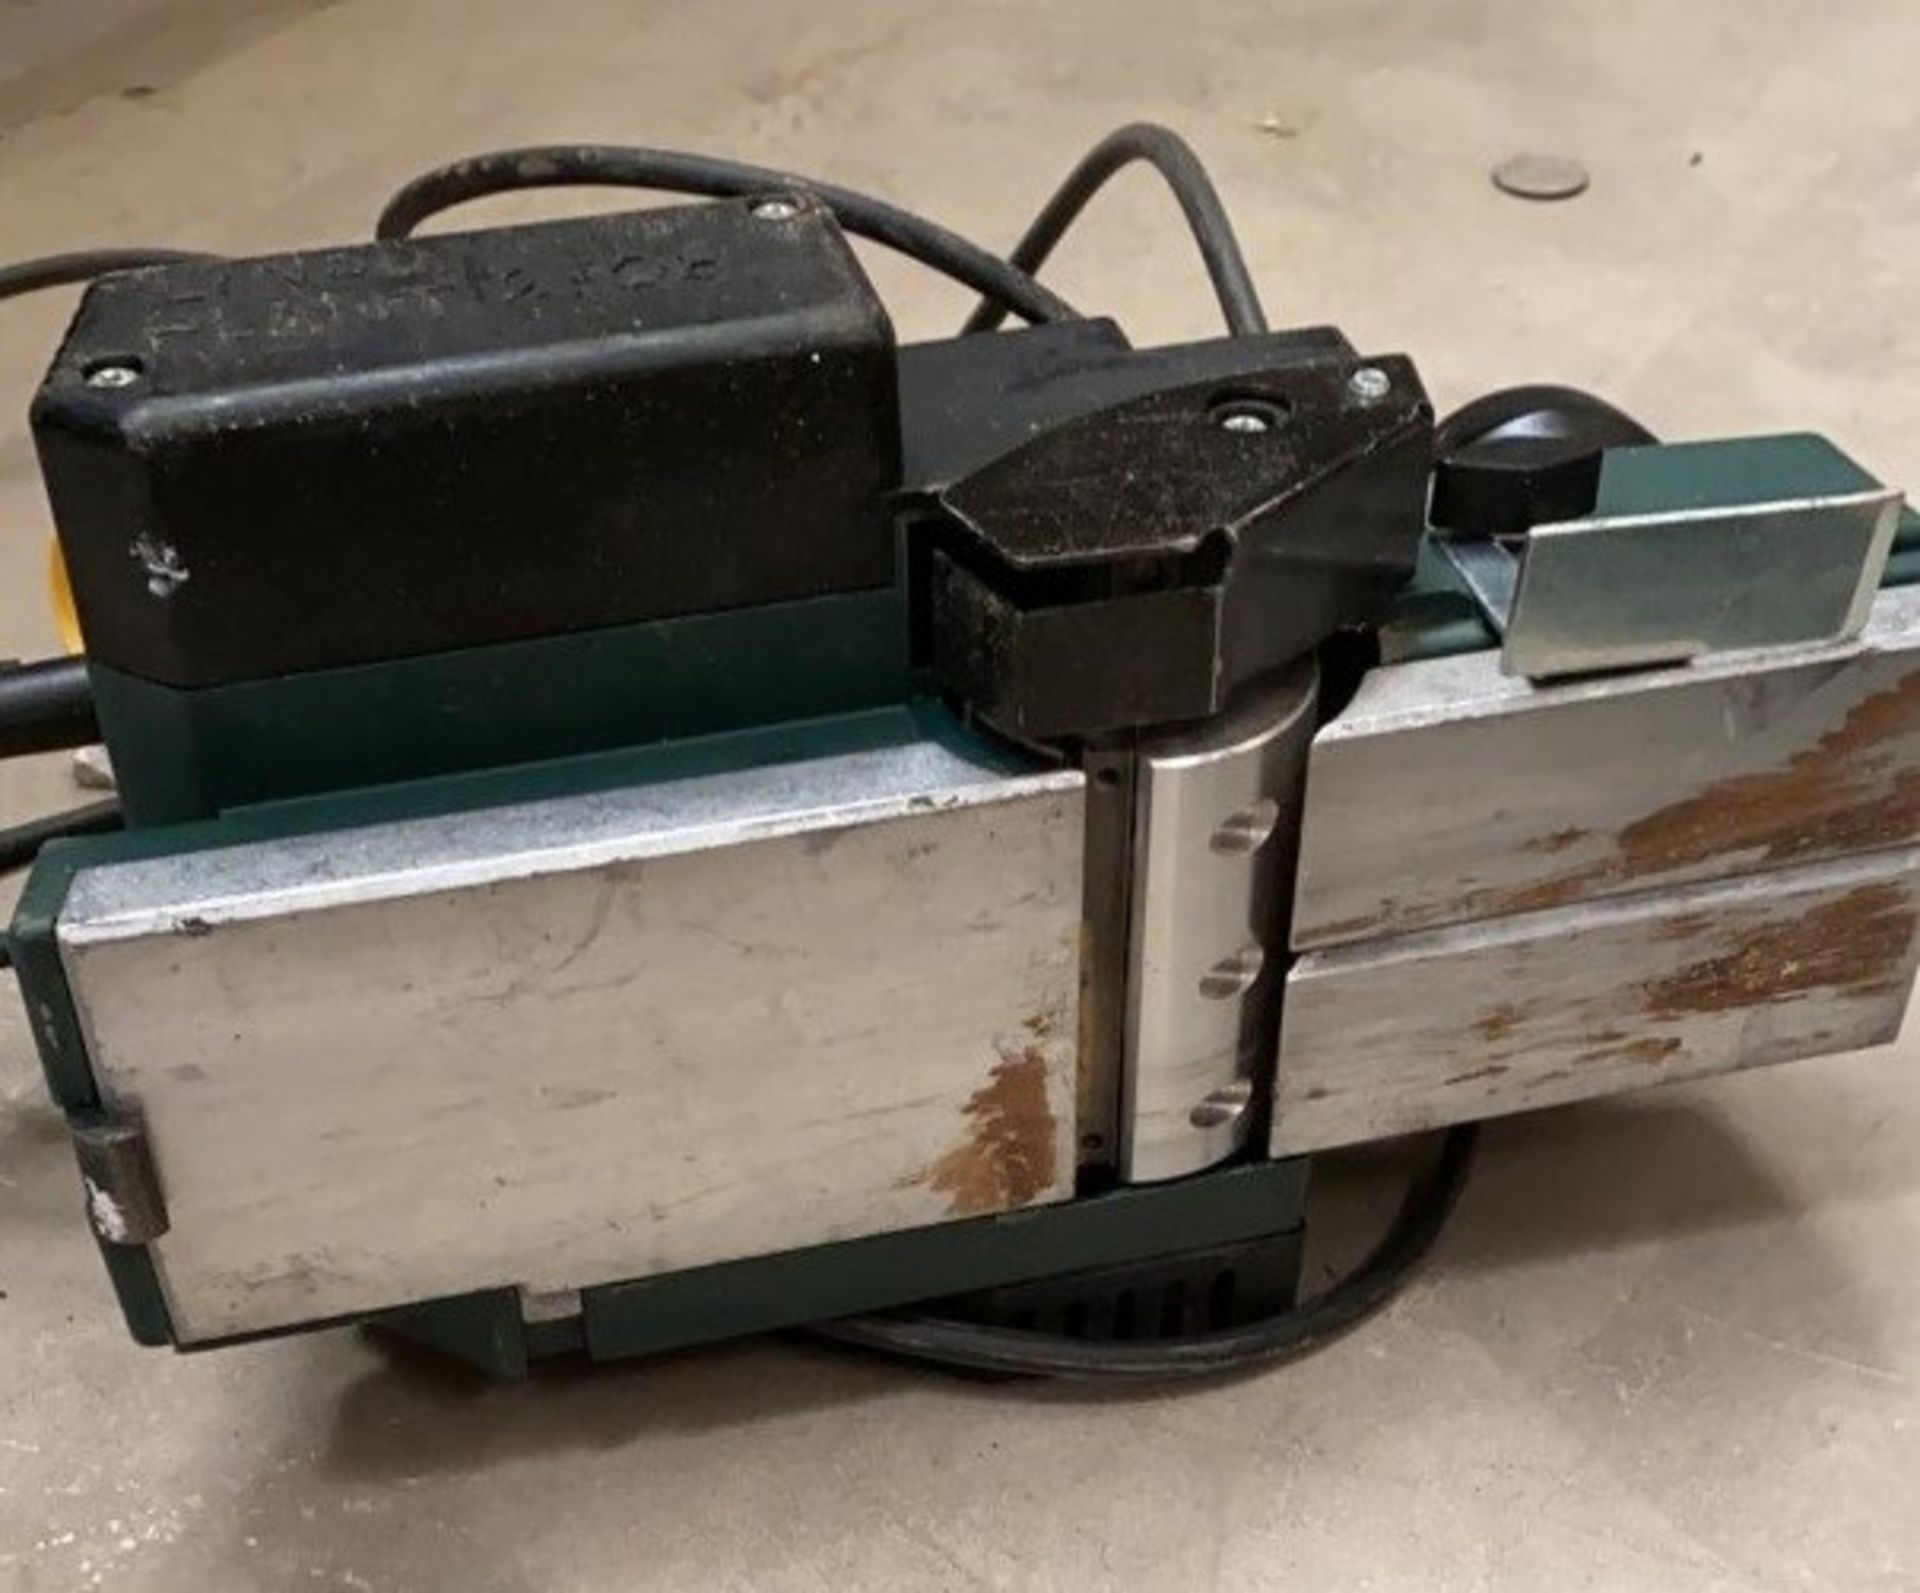 1 x Metabo 110V Planer - Used, Recently Removed From A Working Site - CL505 - Ref: TL018 - Location: - Image 5 of 6